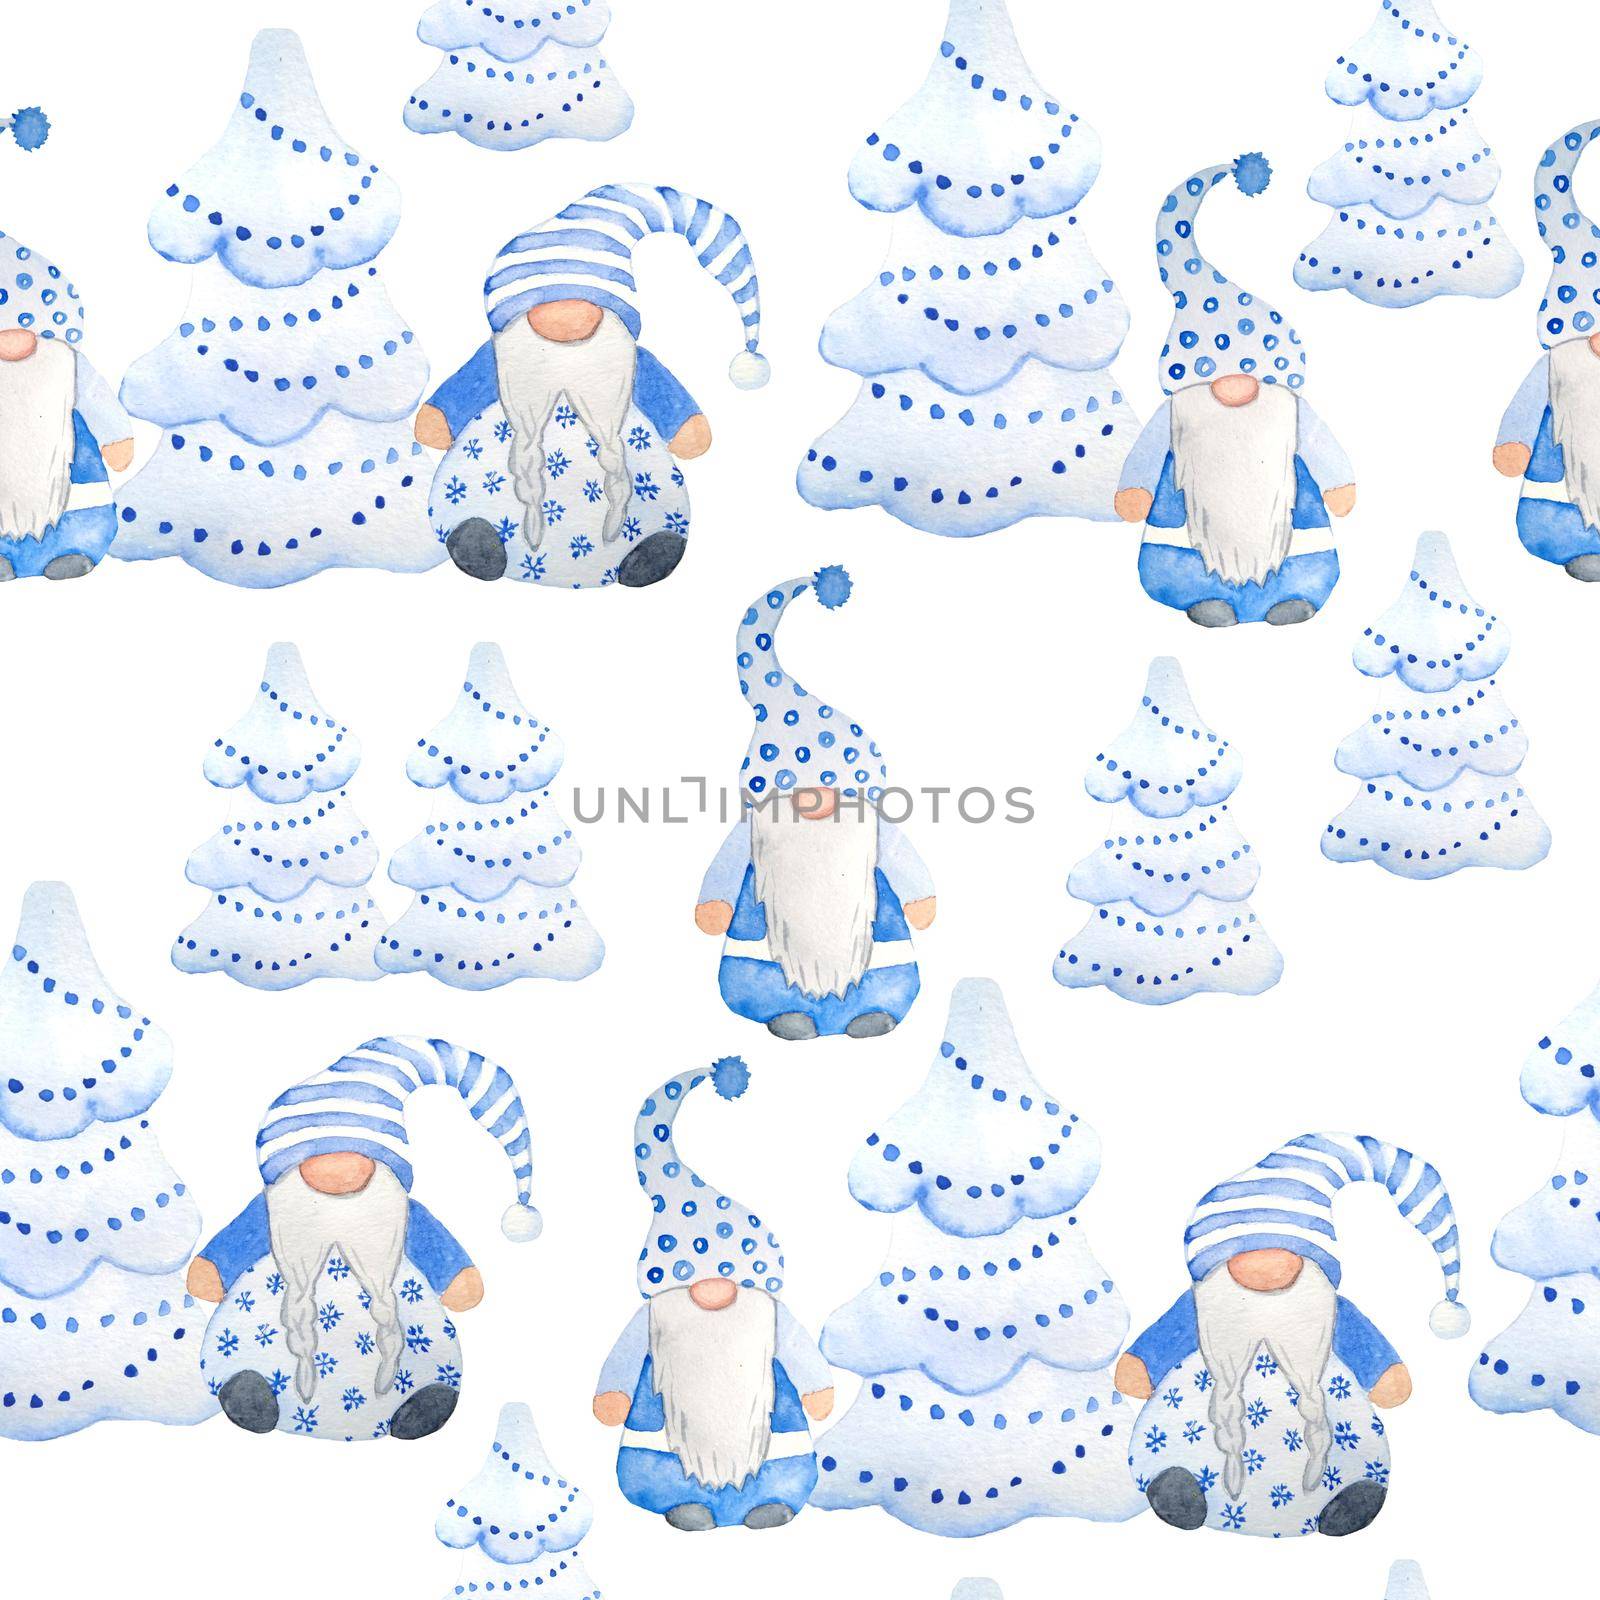 Watercolor hand drawn seamless pattern nordic scandinavian gnomes for christmas decor tree. New year illustration in blue grey Christmas fir tree. Funny winter character north swedish elf in hat beard. Greeting card. by Lagmar